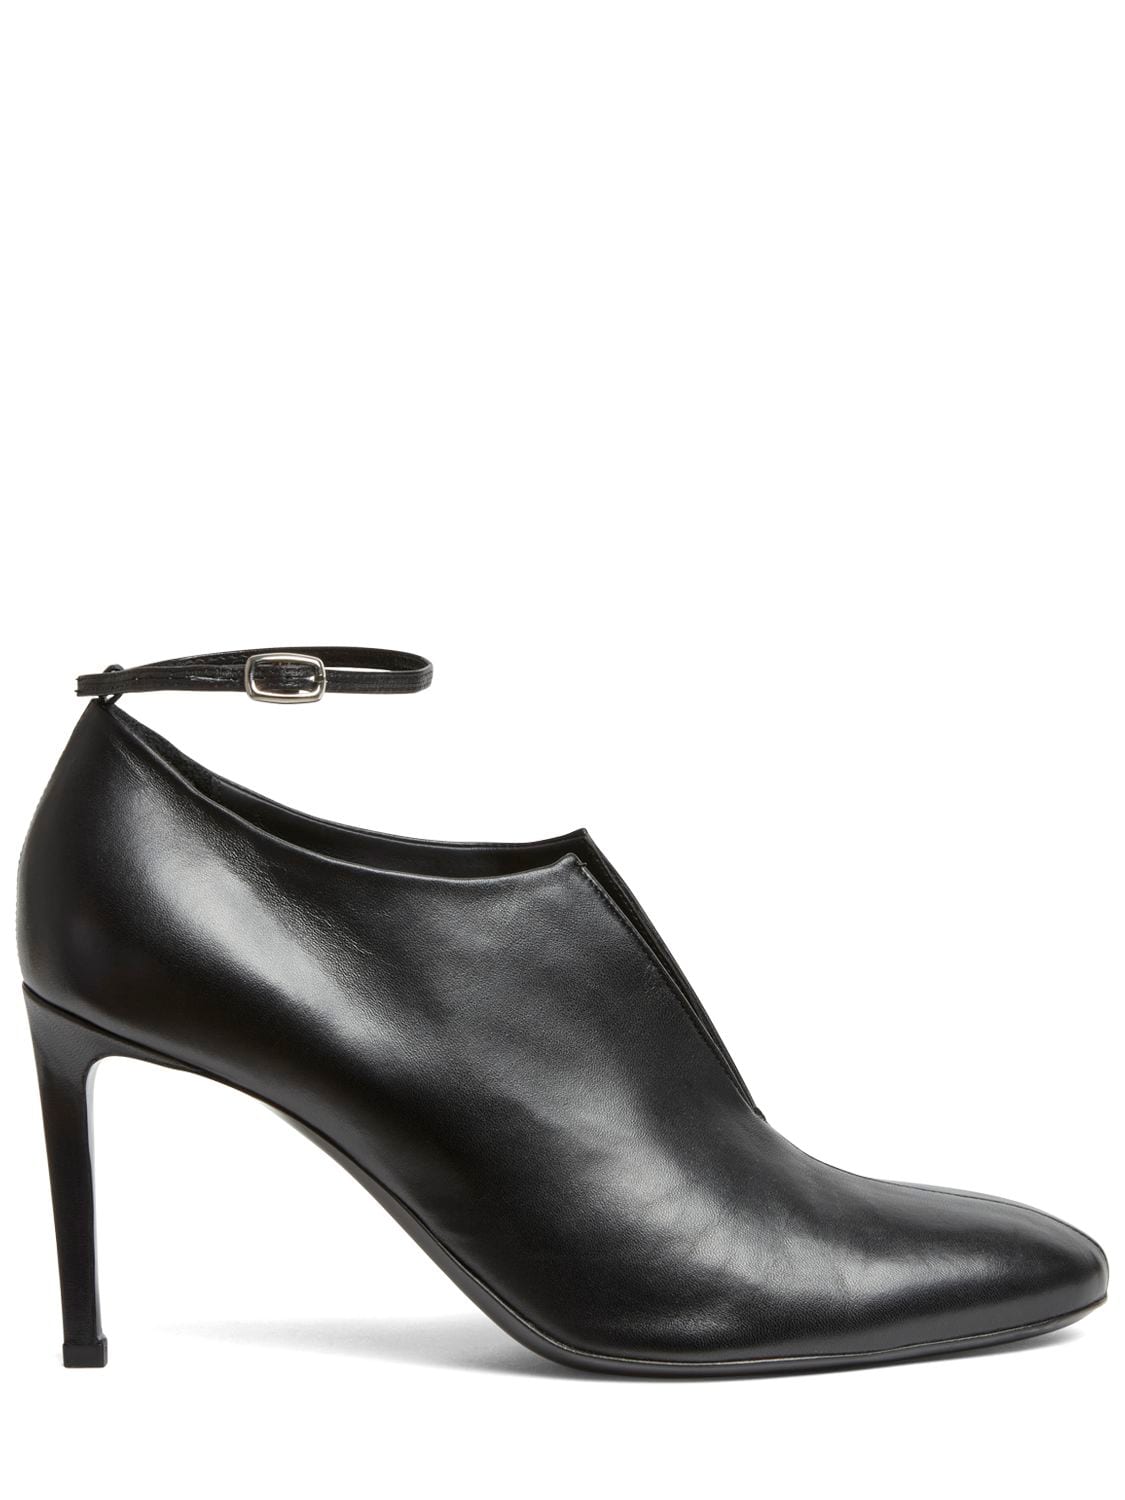 Peter Do Metallic Ankle-strap Low Booties In Black